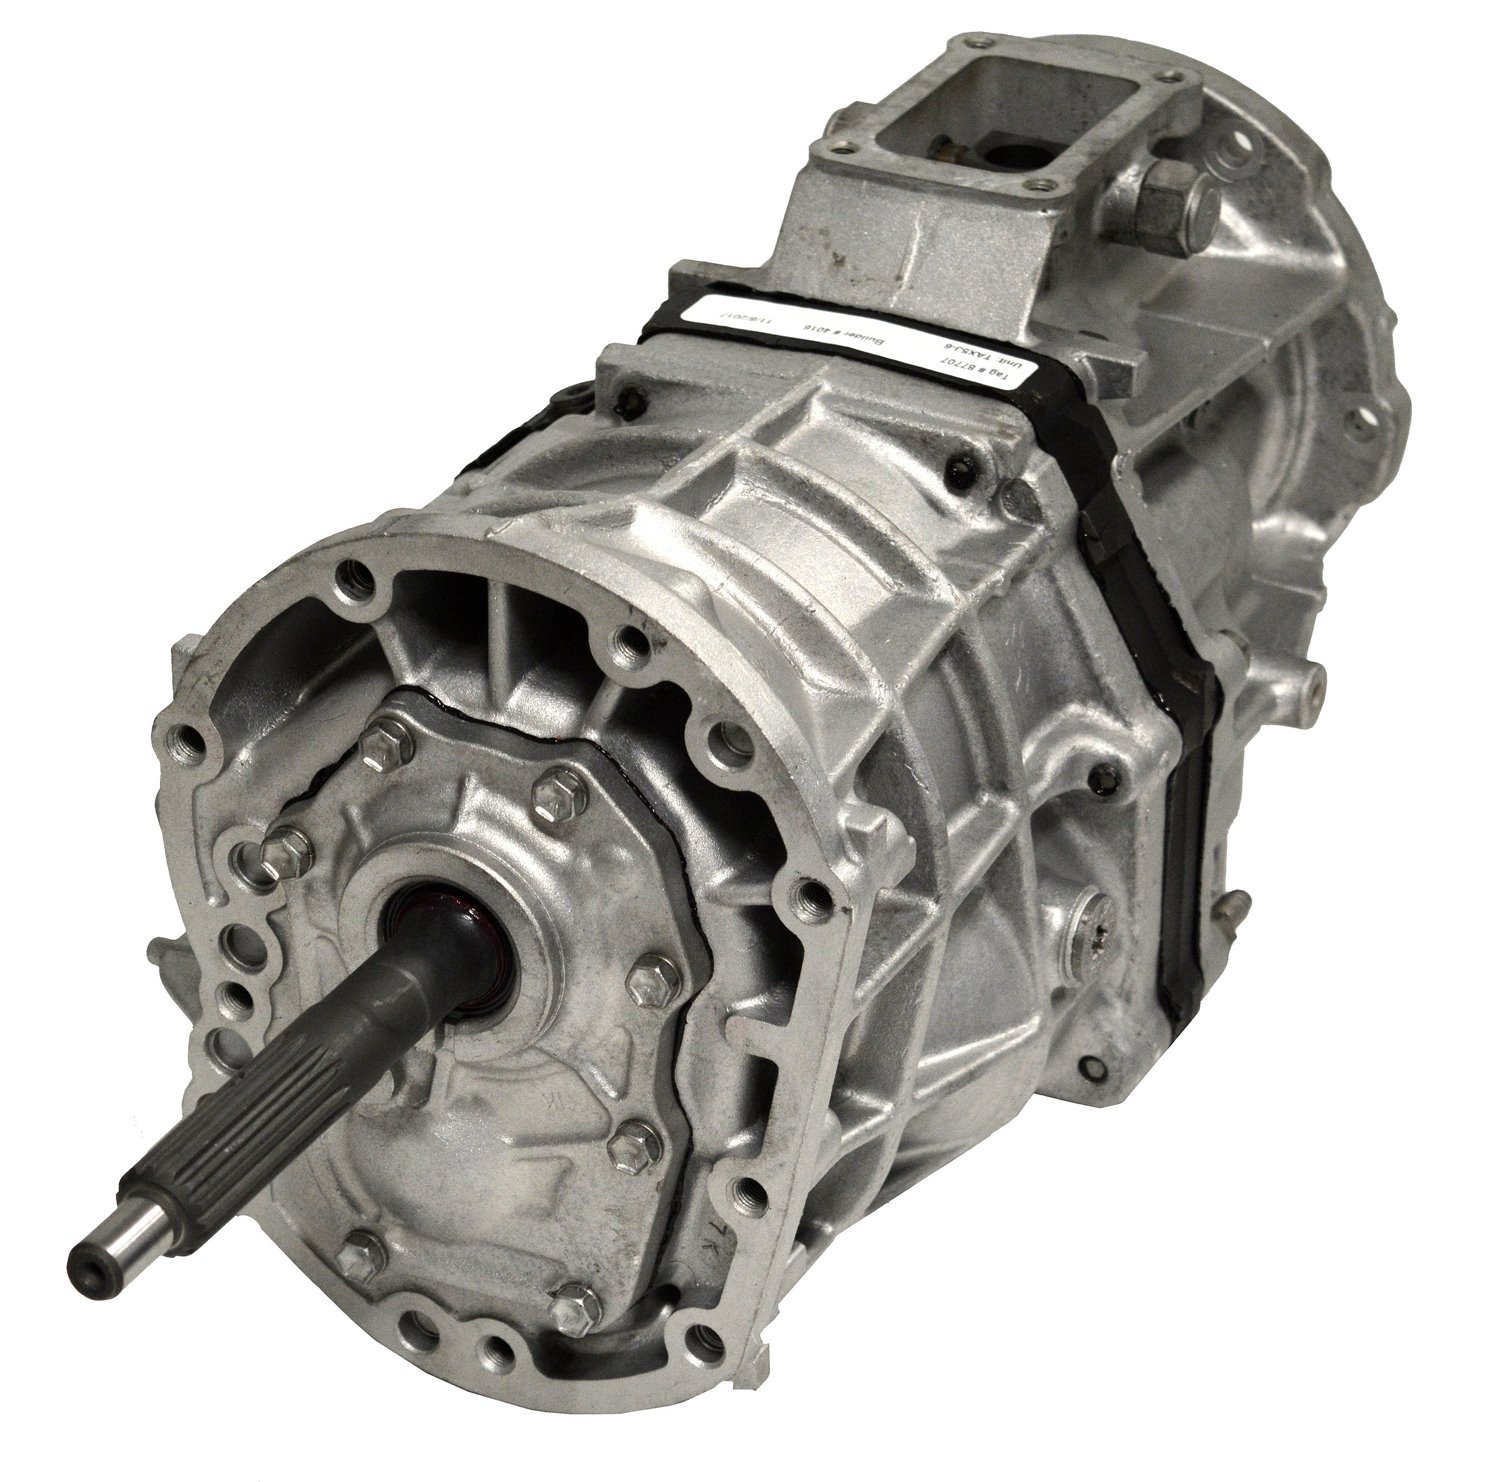 Remanufactured AX5 Manual Transmission for Jeep 97-00 Cherokee,